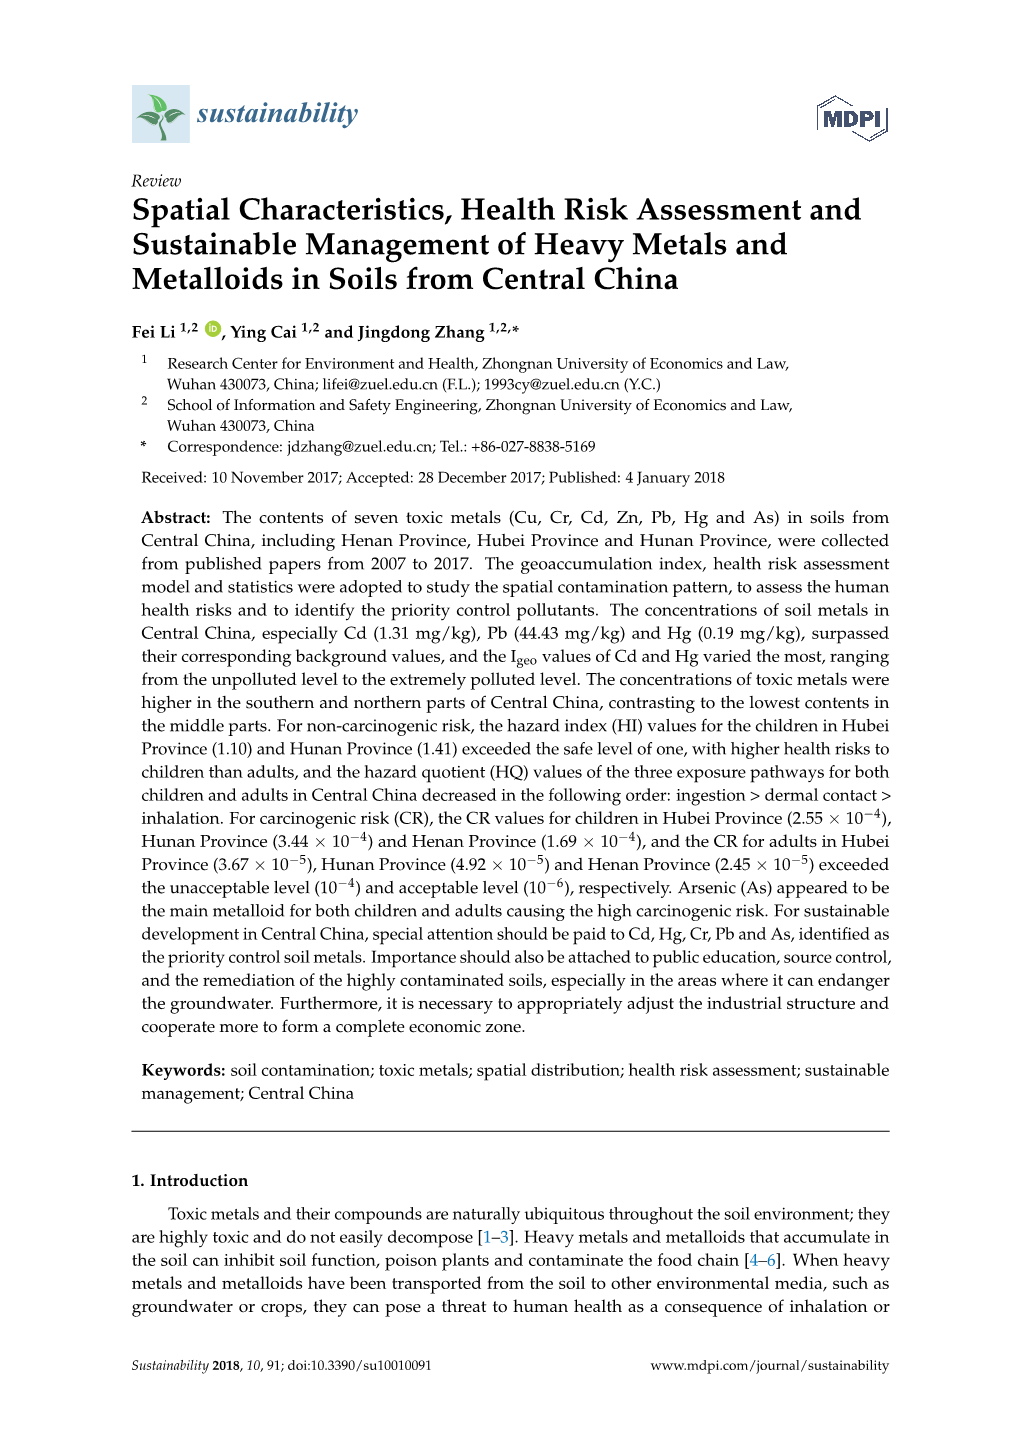 Spatial Characteristics, Health Risk Assessment and Sustainable Management of Heavy Metals and Metalloids in Soils from Central China